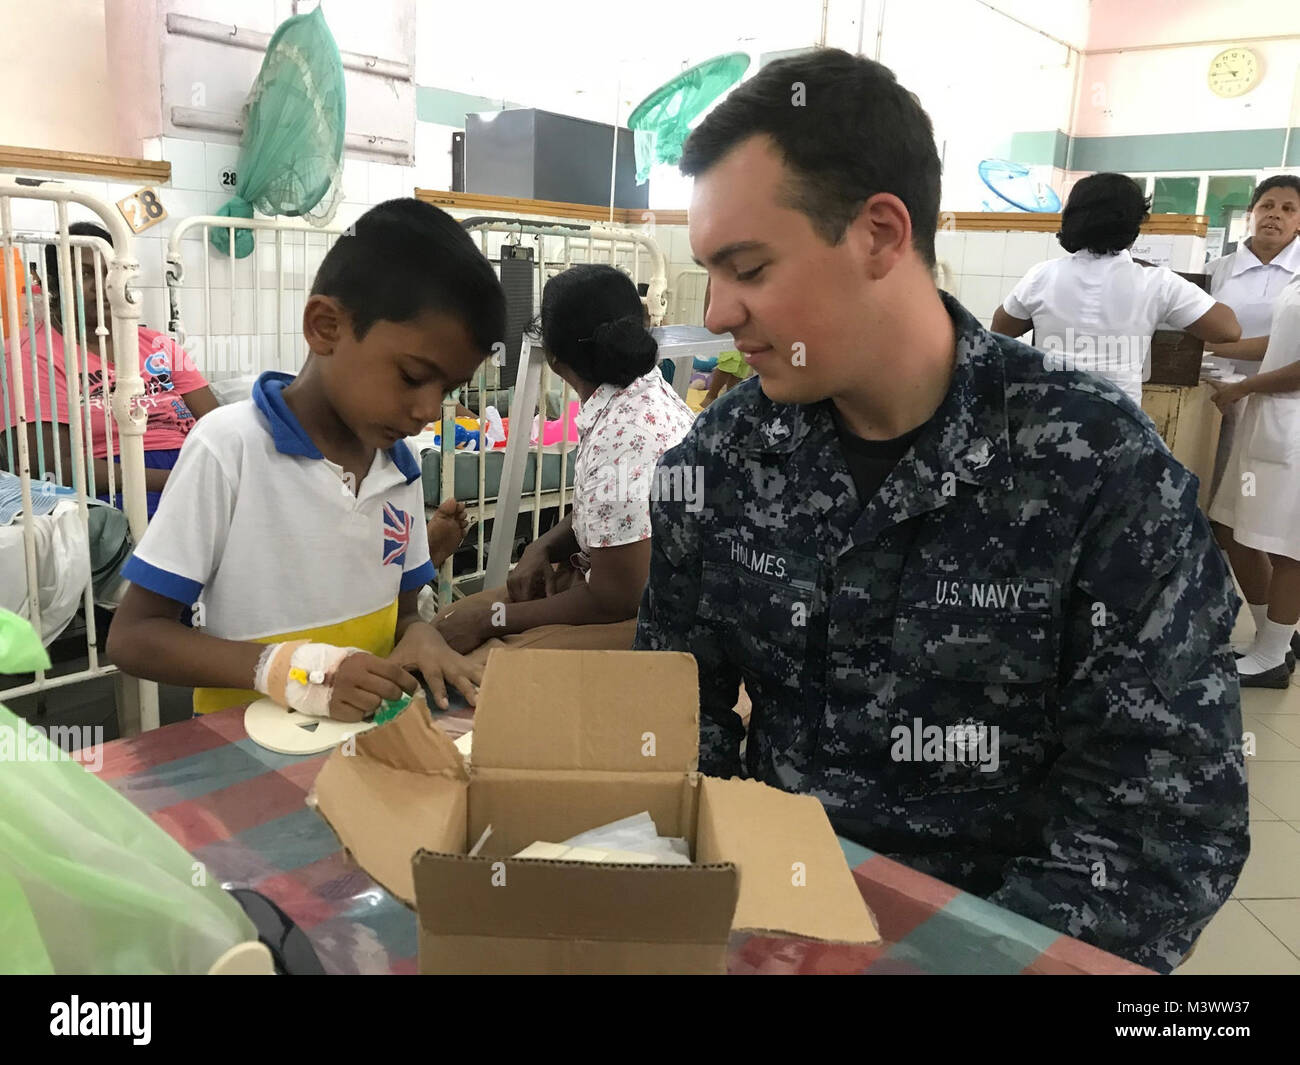 171029-N-OU681-0004 COLOMBO, Sri Lanka (Oct. 29, 2017) Information Systems Technician 3rd Class Joe Holmes, assigned to Ticonderoga-class guided-missile cruiser USS Princeton (CG 59), does crafts with a boy at Lady Ridgeway Hospital in Colombo, Sri Lanka, during a volunteer event with Nimitz Carrier Strike Group (CSG). Nimitz CSG is on a regularly scheduled deployment in the 7th Fleet area of responsibility in support of maritime security operations and theater security cooperation efforts. (U.S. Navy photo by Lt. j.g. Michelle Tucker/Released) 171029-N-OU681-0004 by Naval Base Kitsap (NBK) Stock Photo